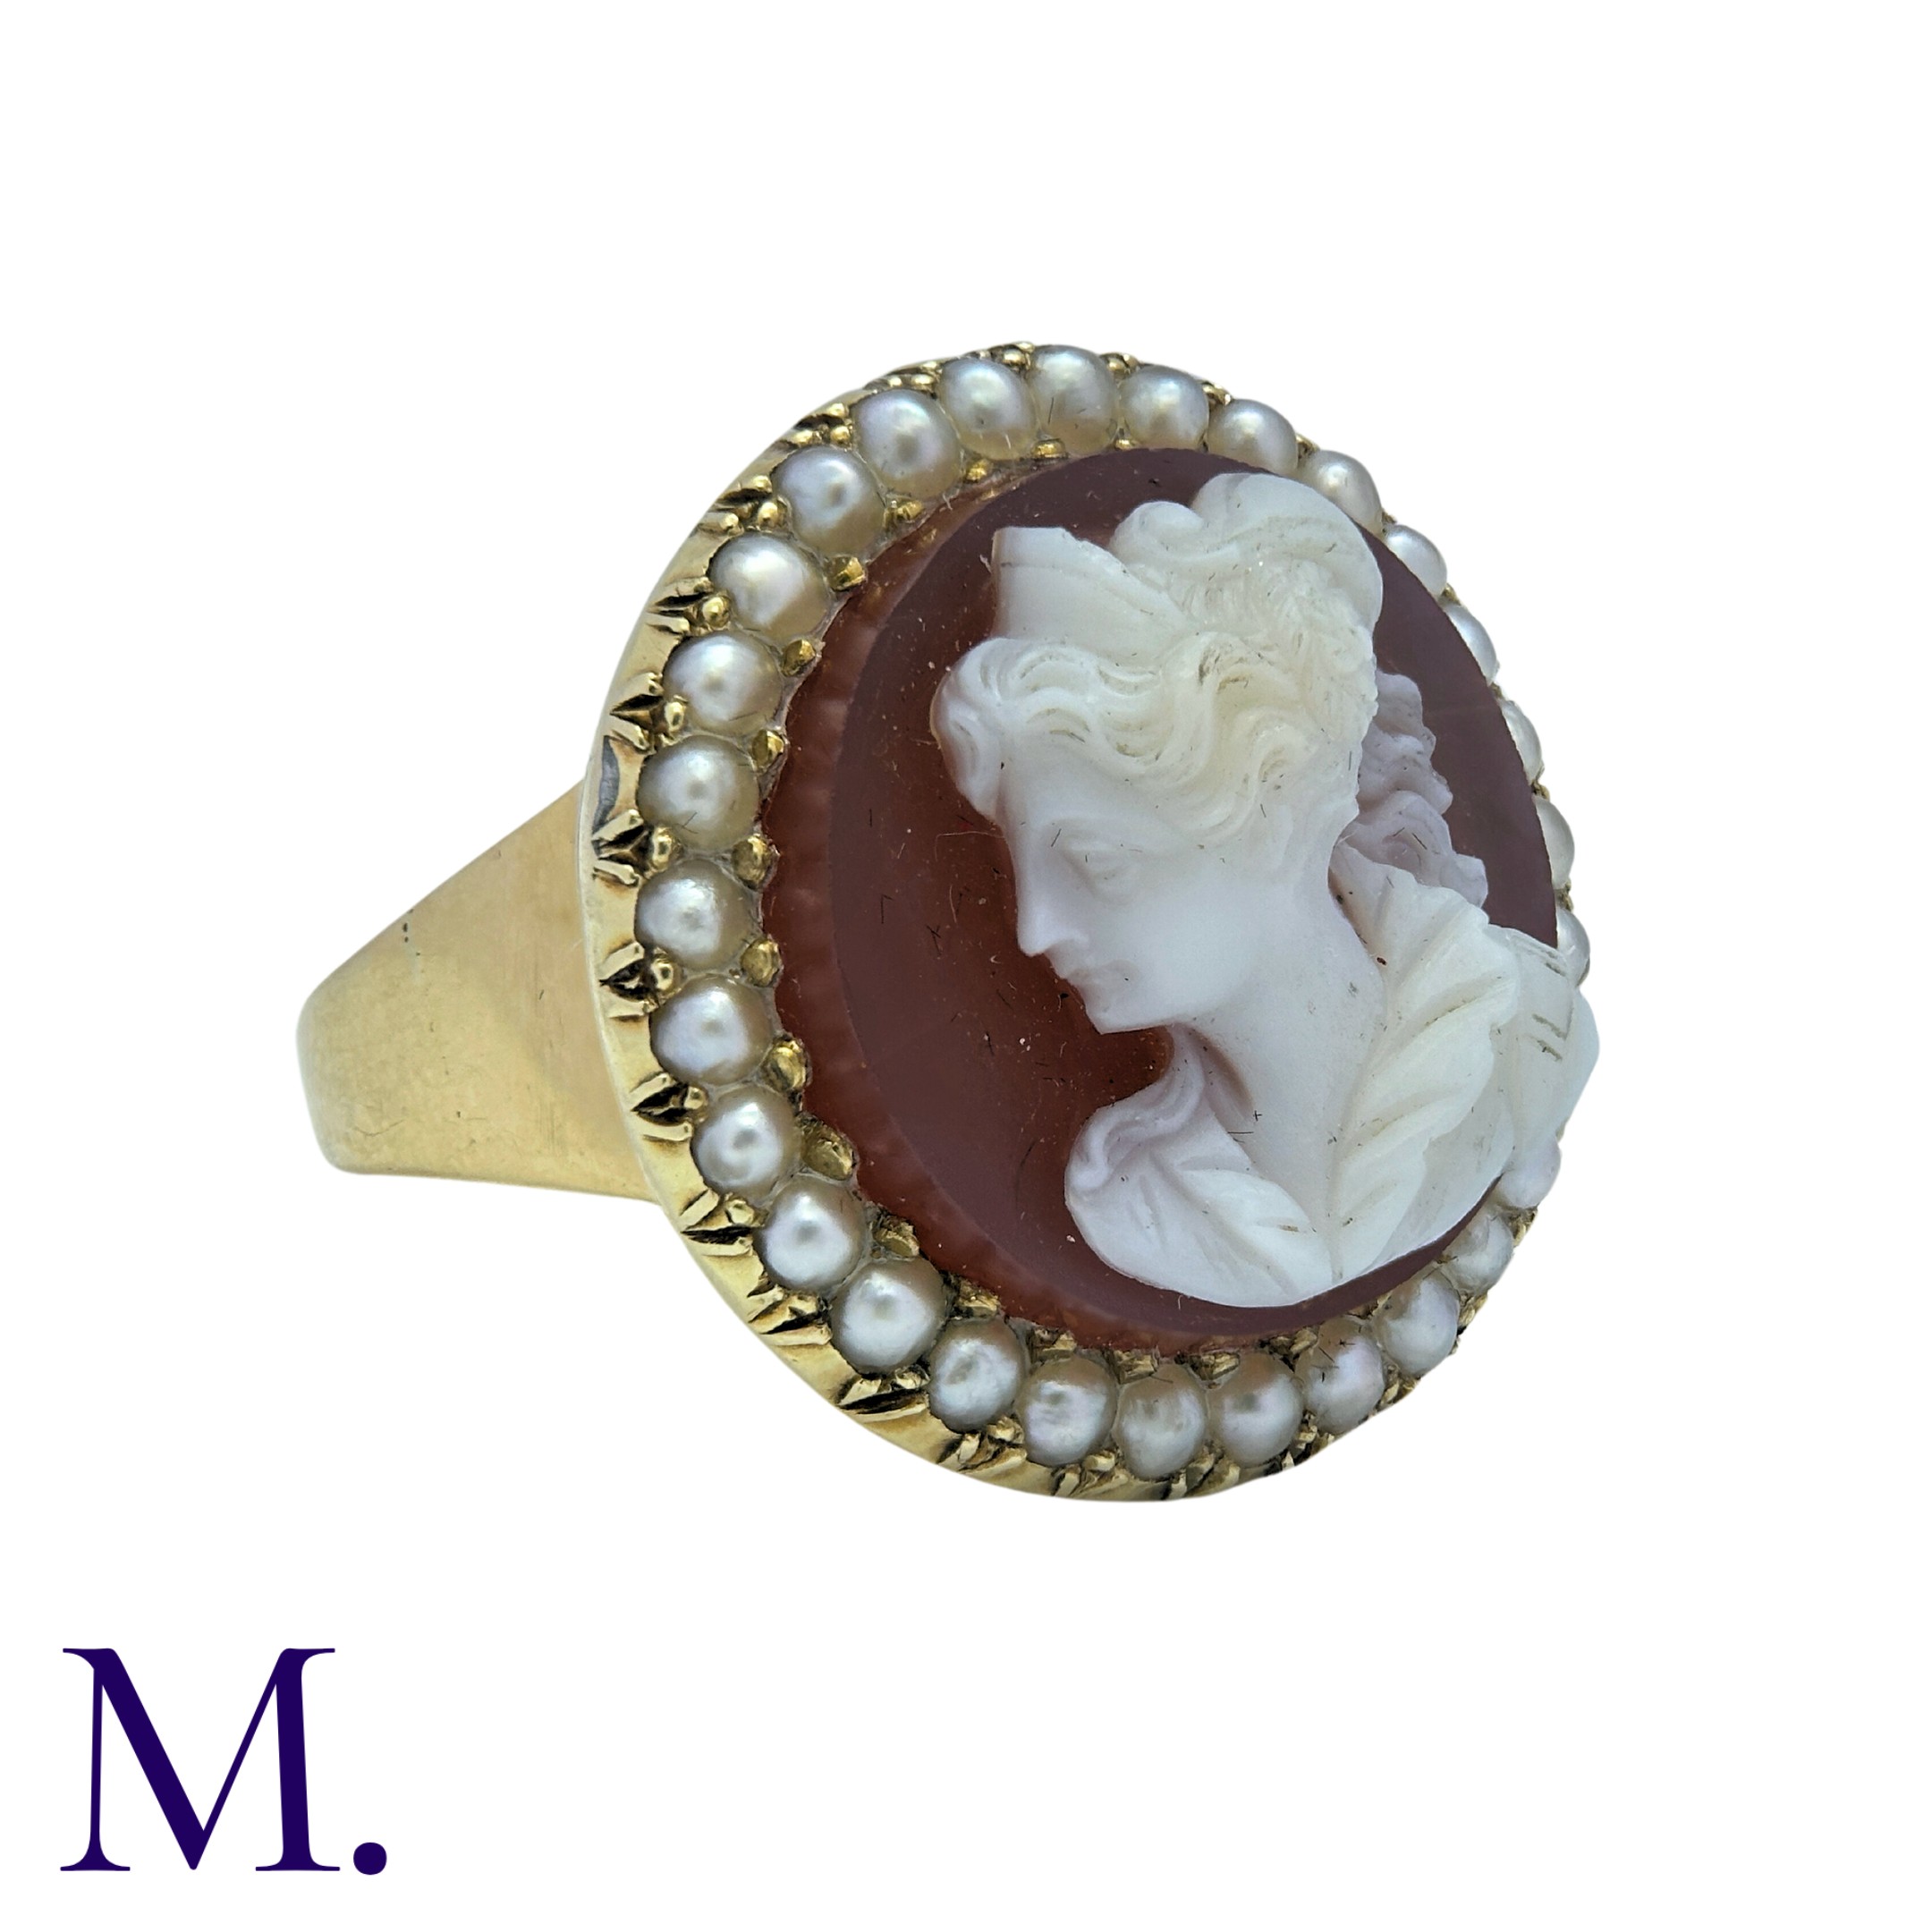 A Hardstone Cameo Ring in 18K yellow gold set with a hardstone cameo depicting a female bust, with - Image 3 of 4